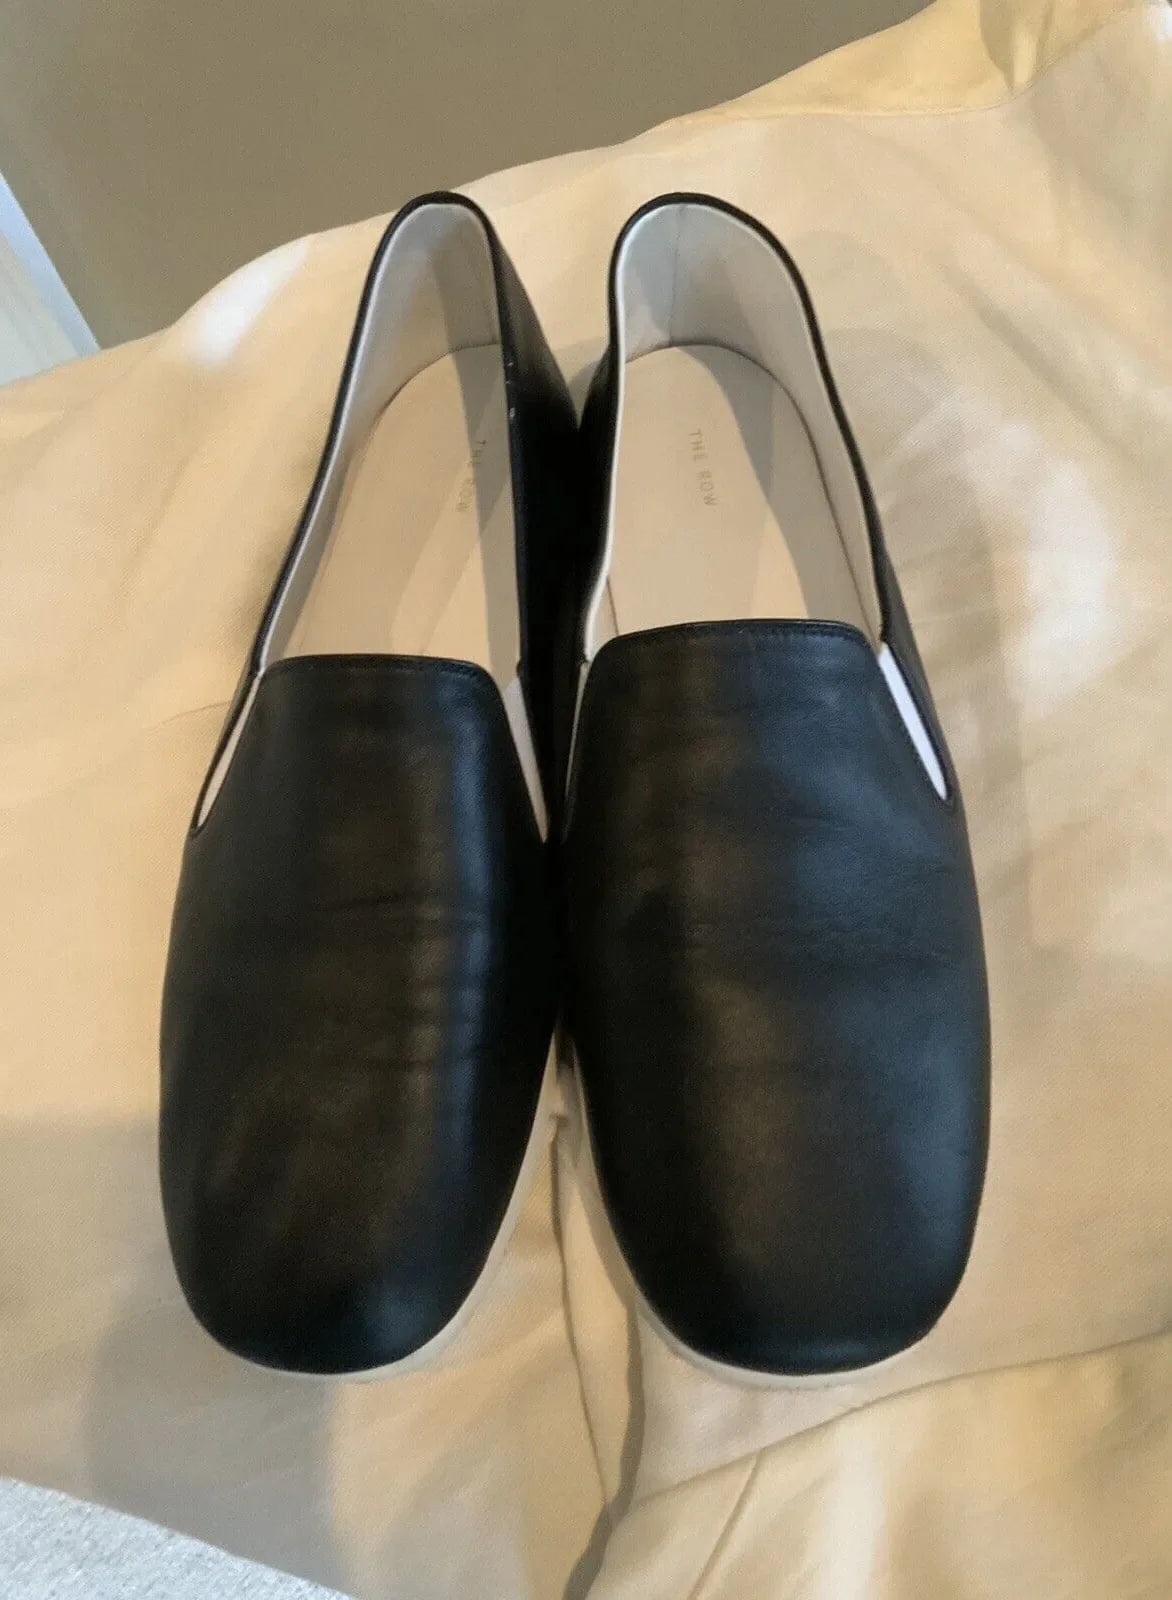 BLACK LEATHER SLIPPERS
SIZE 9.5